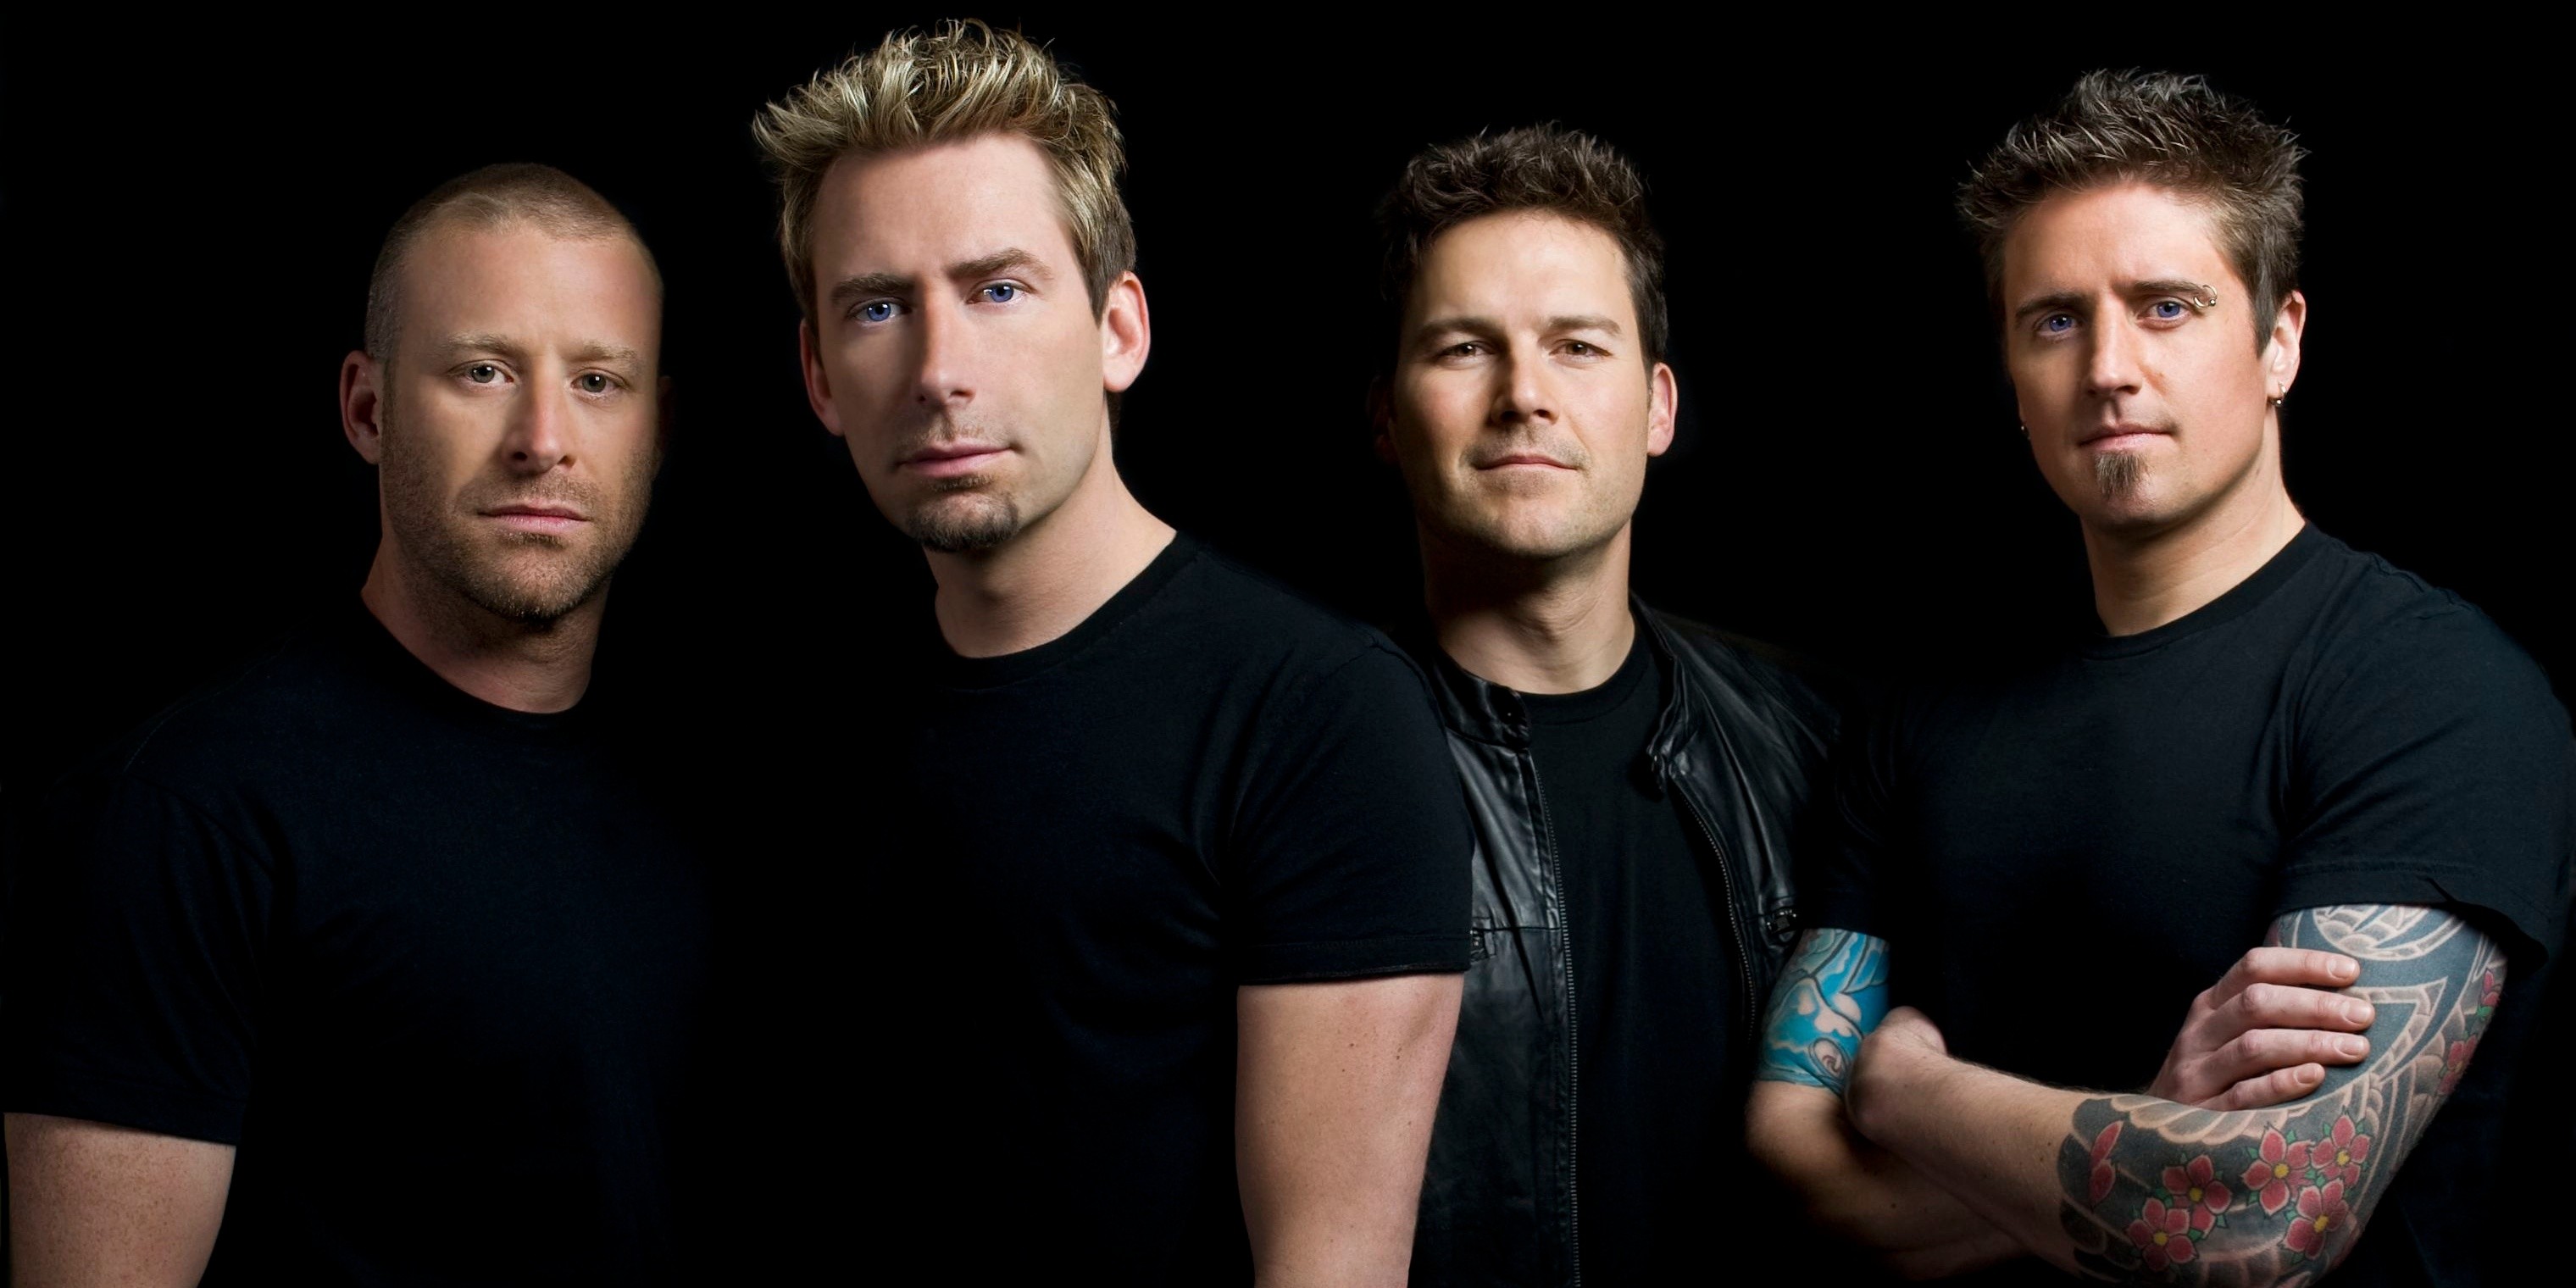 "We're obviously doing something right if someone hates us that much": An interview with Mike Kroeger of Nickelback